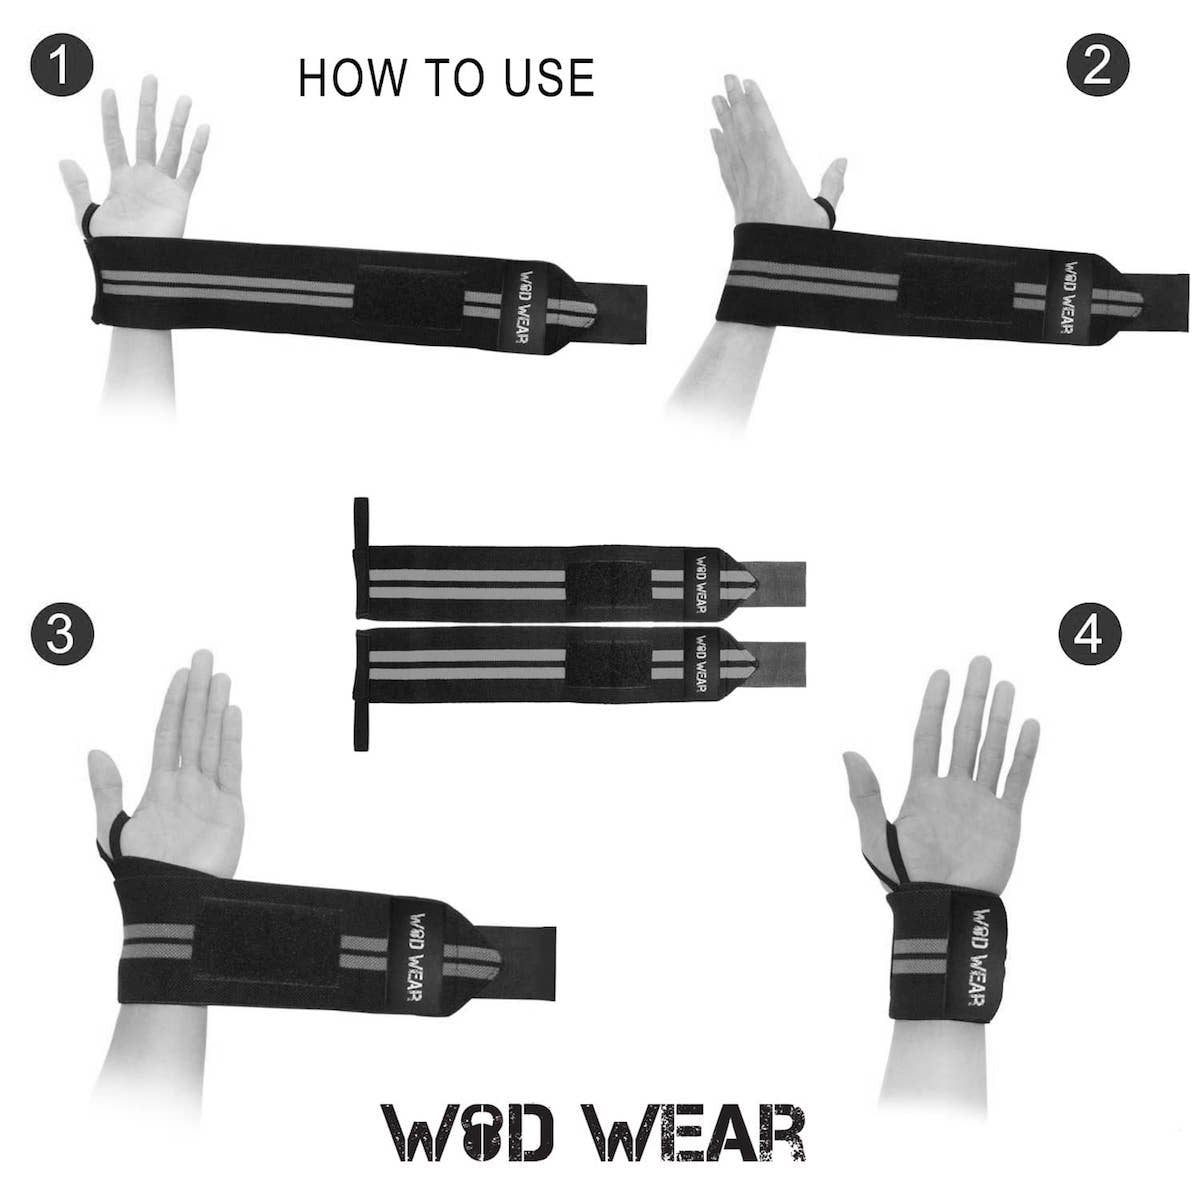 Elastic Wrist Wraps - 18 Inch Pair for Fitness, Powerlifting, Bodybuilding, Weight Lifting, Cross-Training Wrist Supports for Weight Training - with Hook and Loop Grip (Diamond)